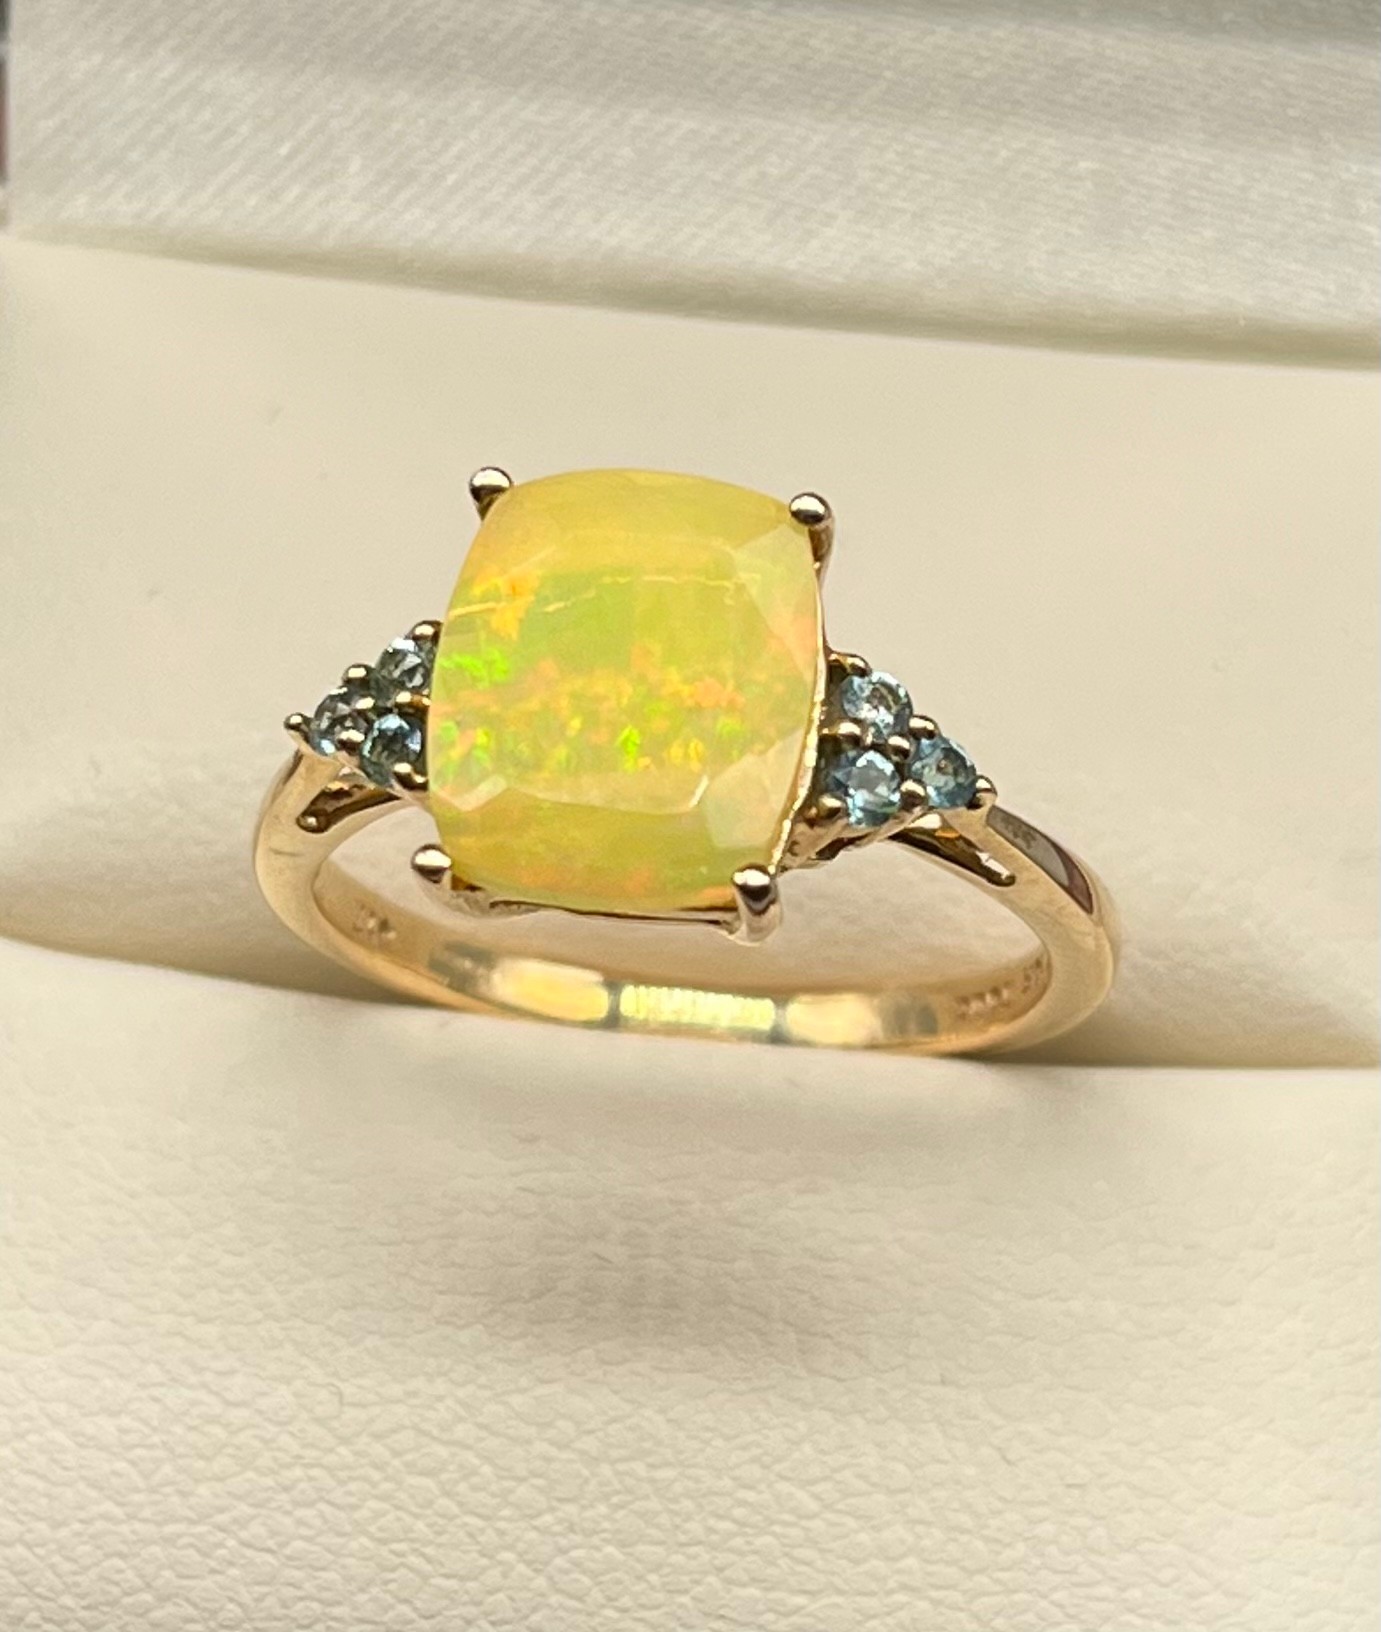 10ct yellow gold ladies ring set with an Ethiopian opal stone off set by blue cut stone